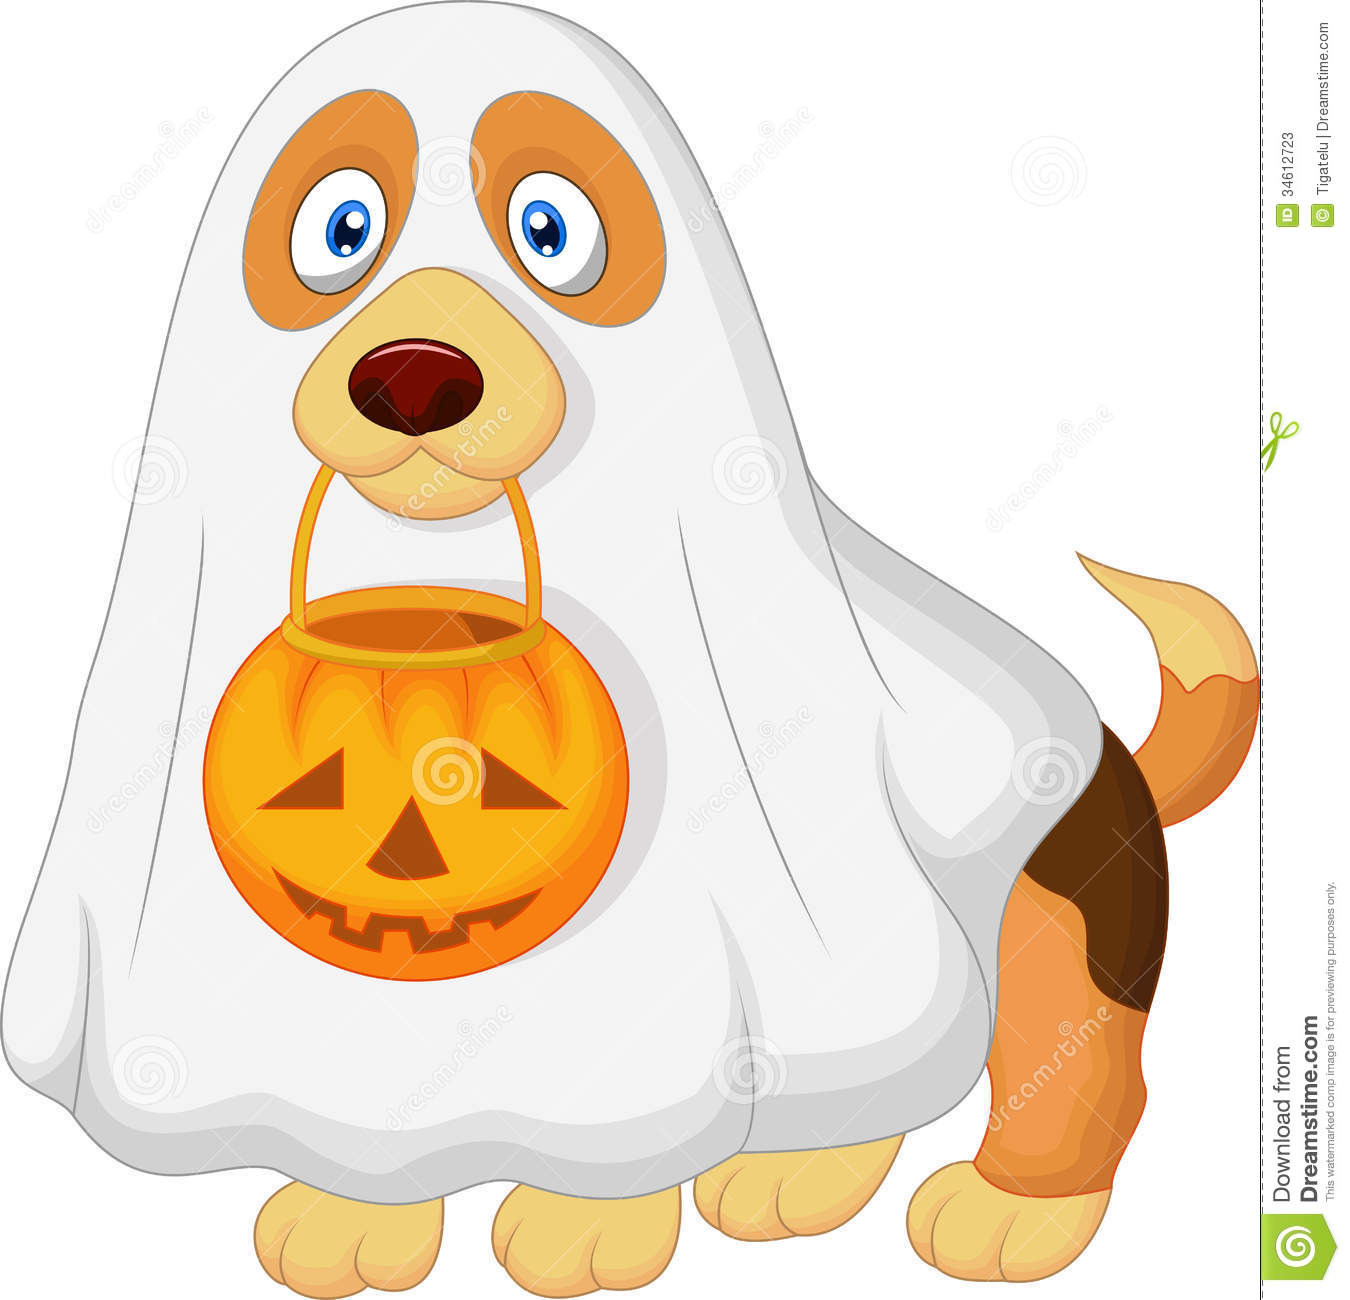 Cartoon Dog Dressed Up As A Spooky Ghost Stock Photos   Image    